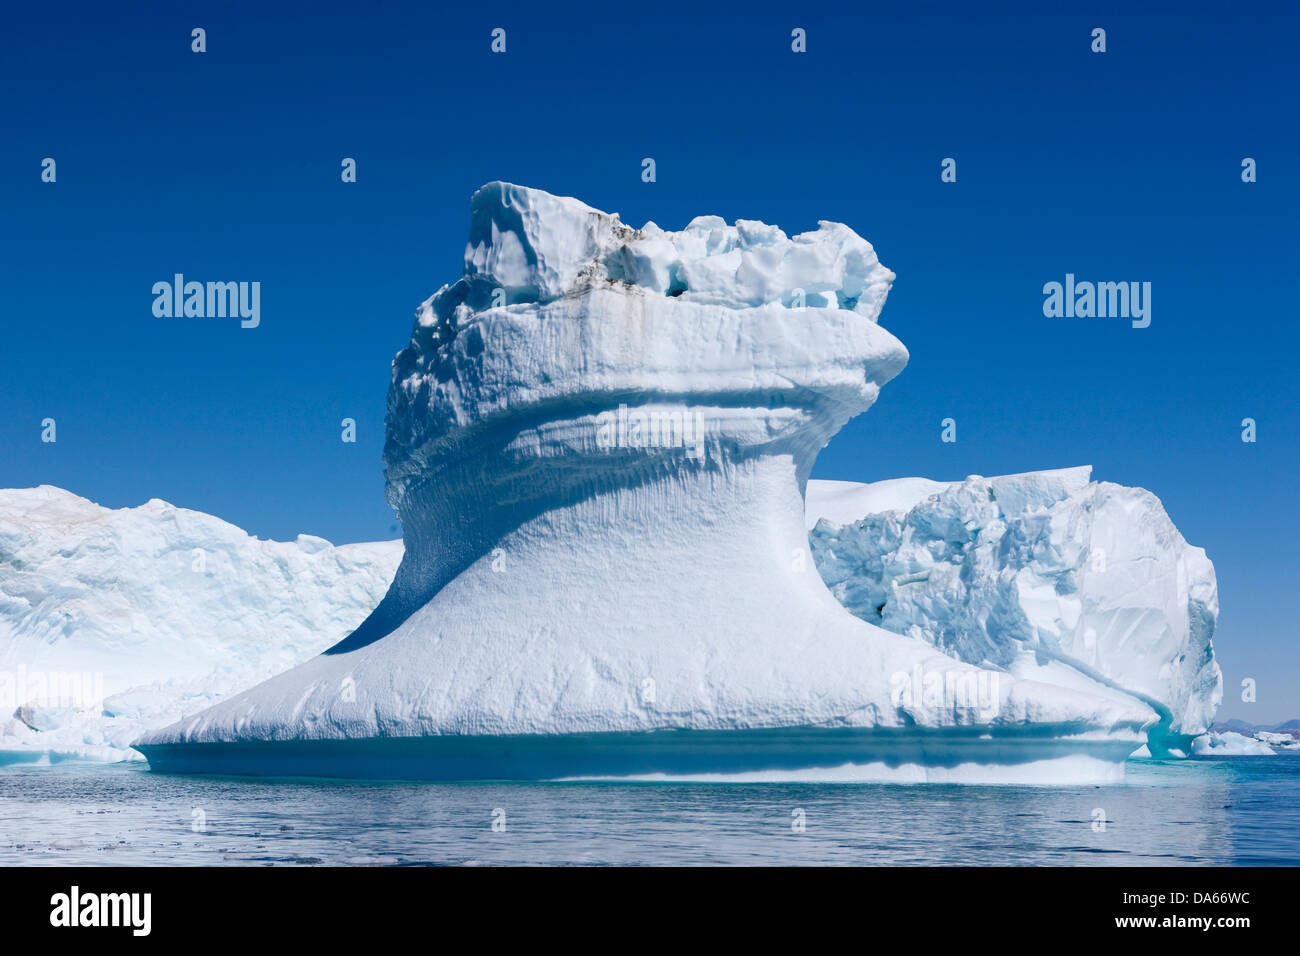 Icebergs, Greenland, East Greenland, ice, iceberg, Tassiilaq, nature, formation, group, white, blue, cold, Stock Photo